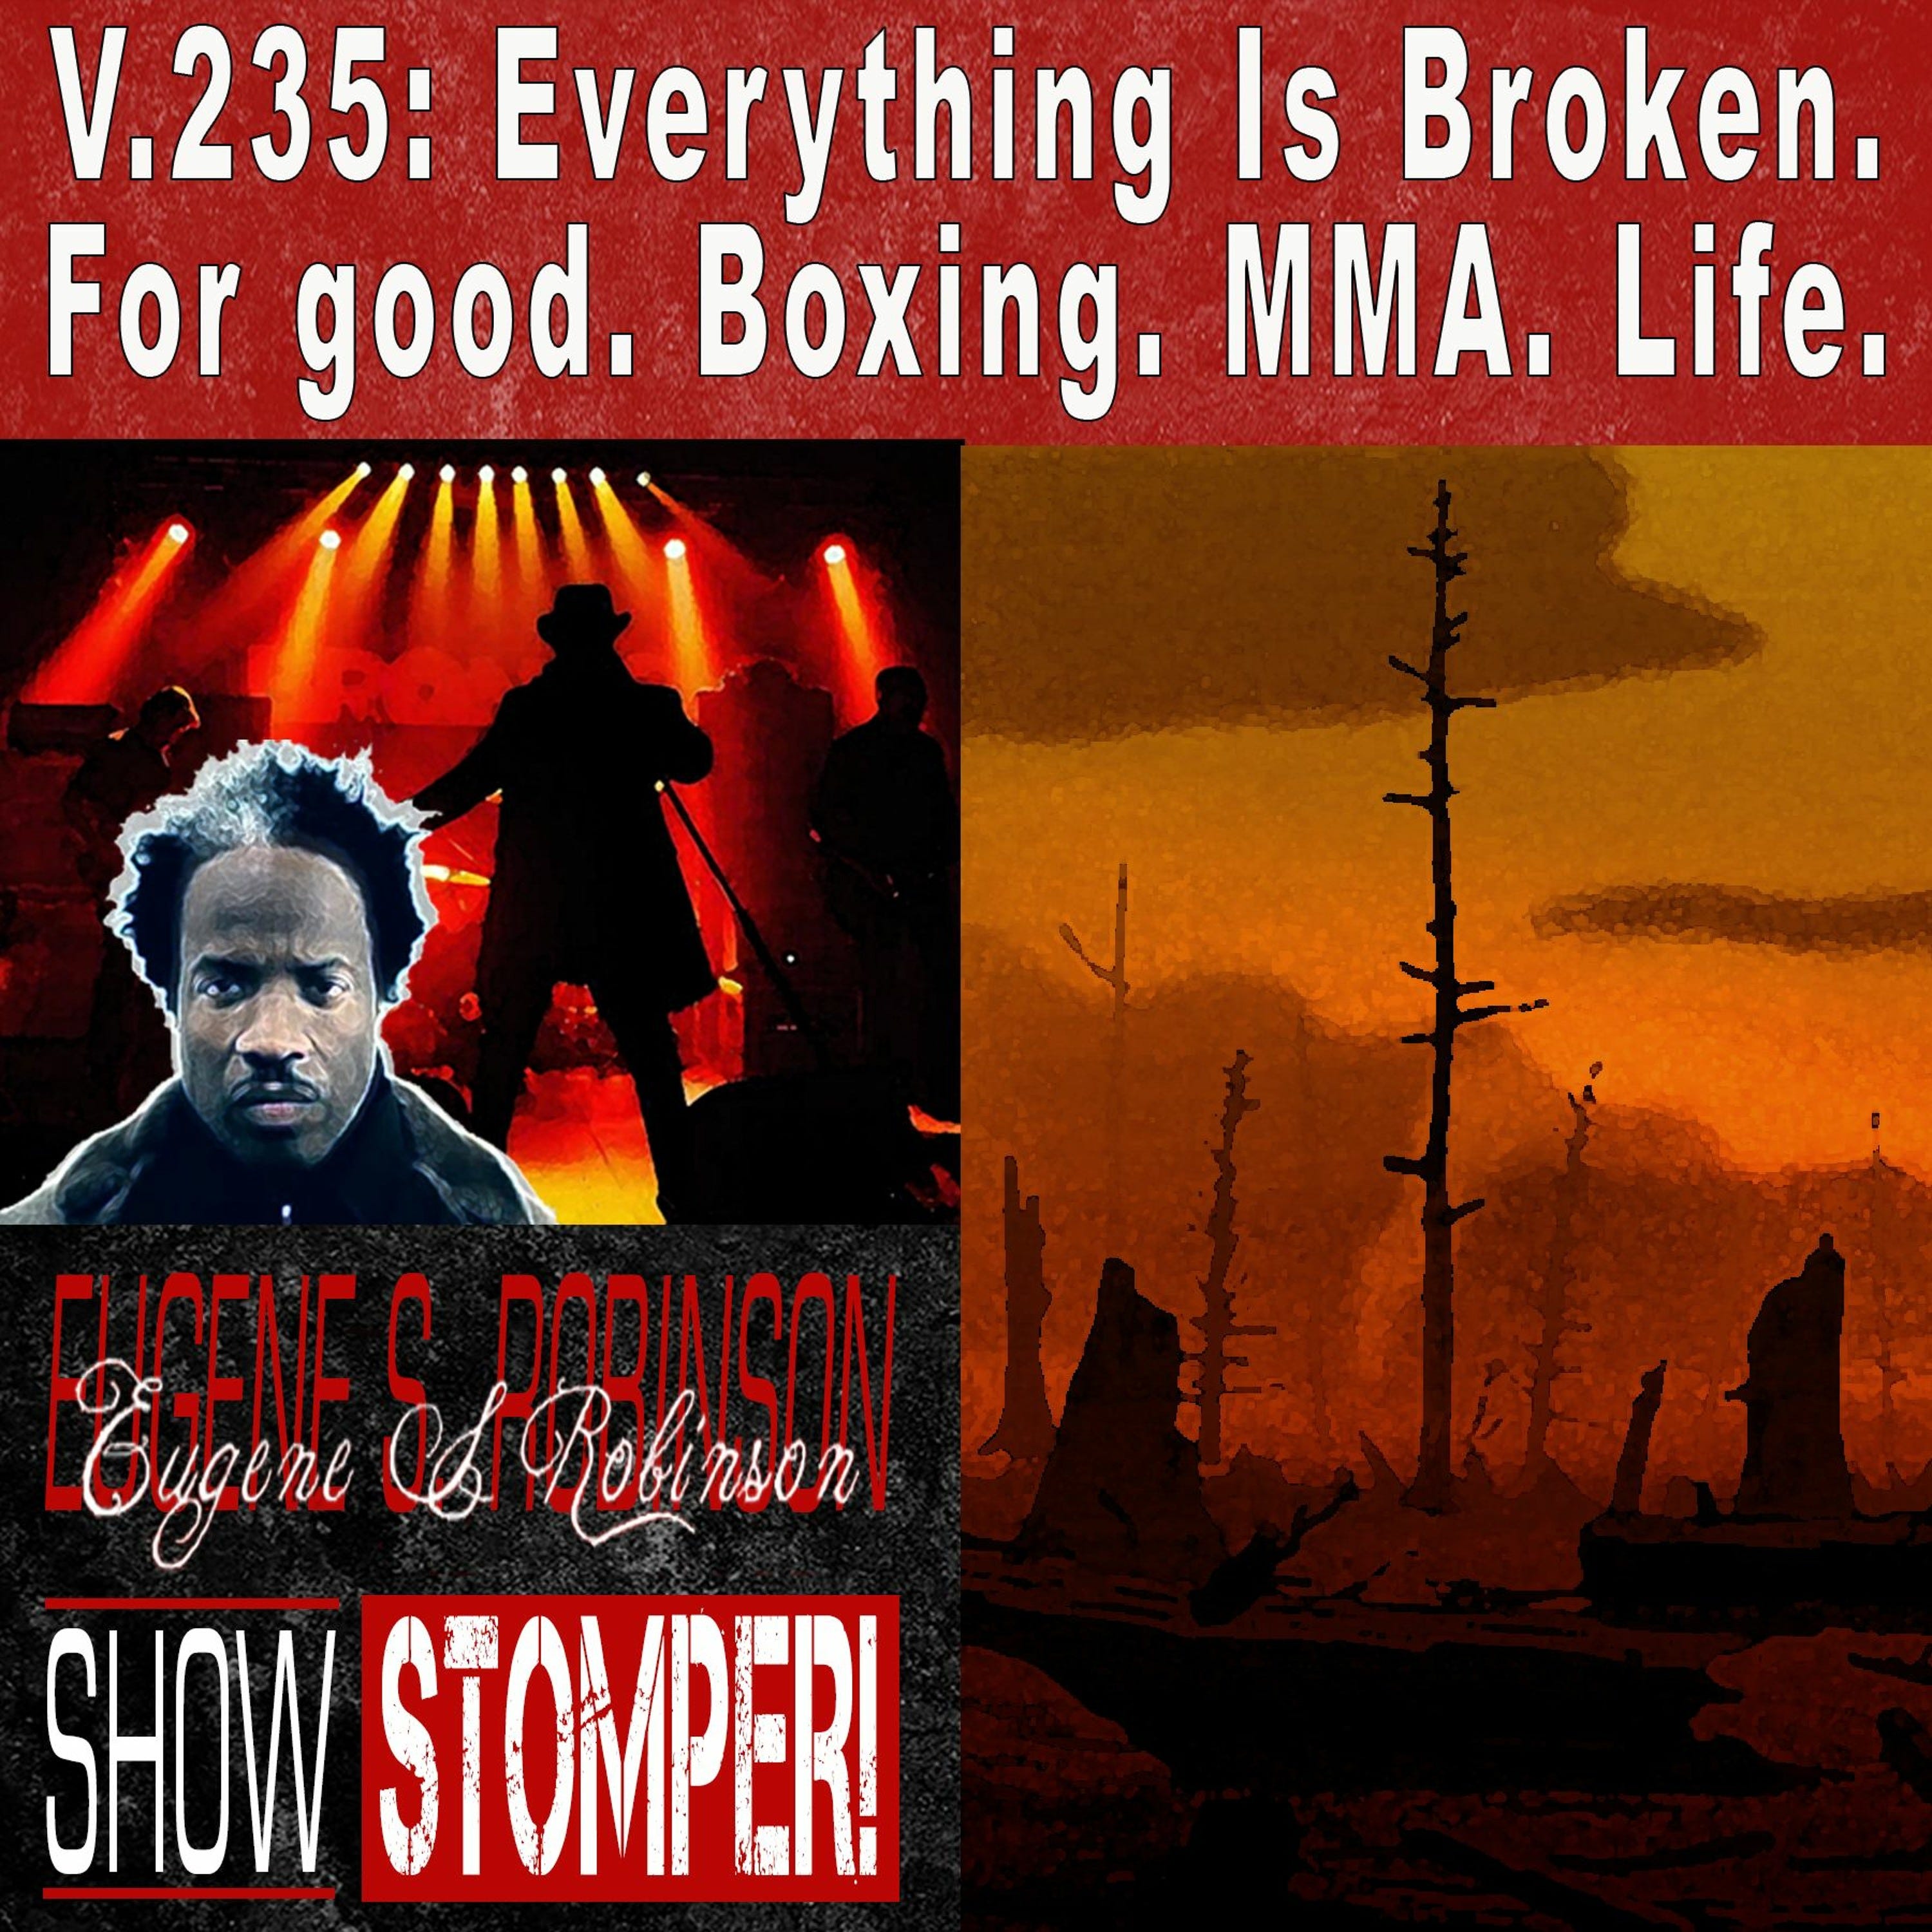 V.235: Everything Is Broken. For good. Boxing. MMA. Life. On The Eugene S. Robinson Show Stomper!